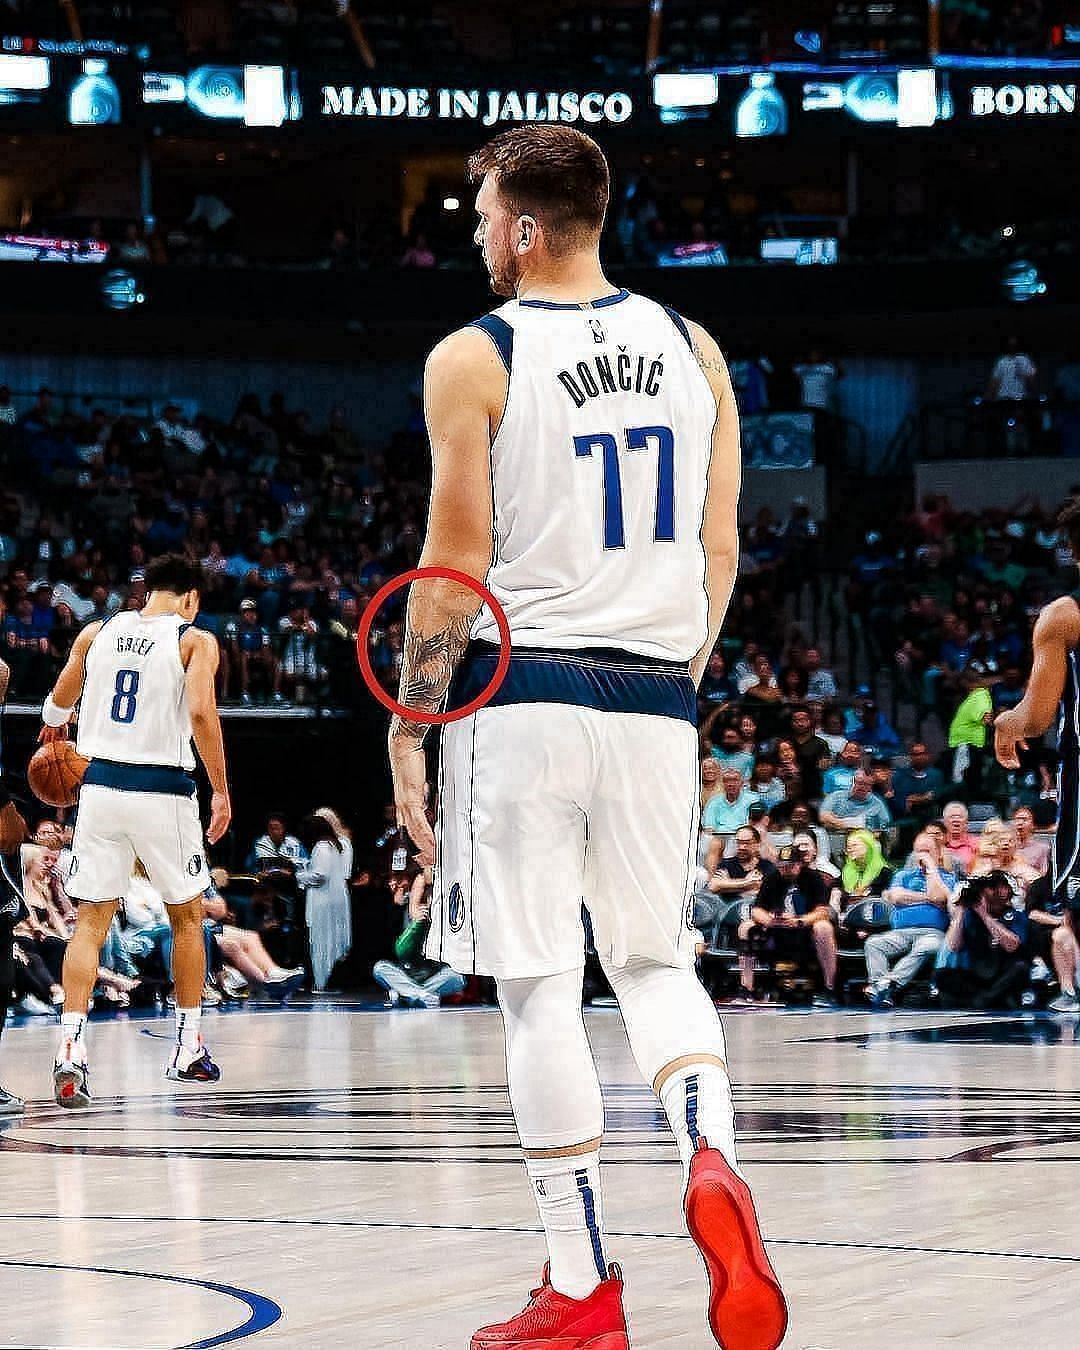 Luka Doncic Cryptic Tattoos